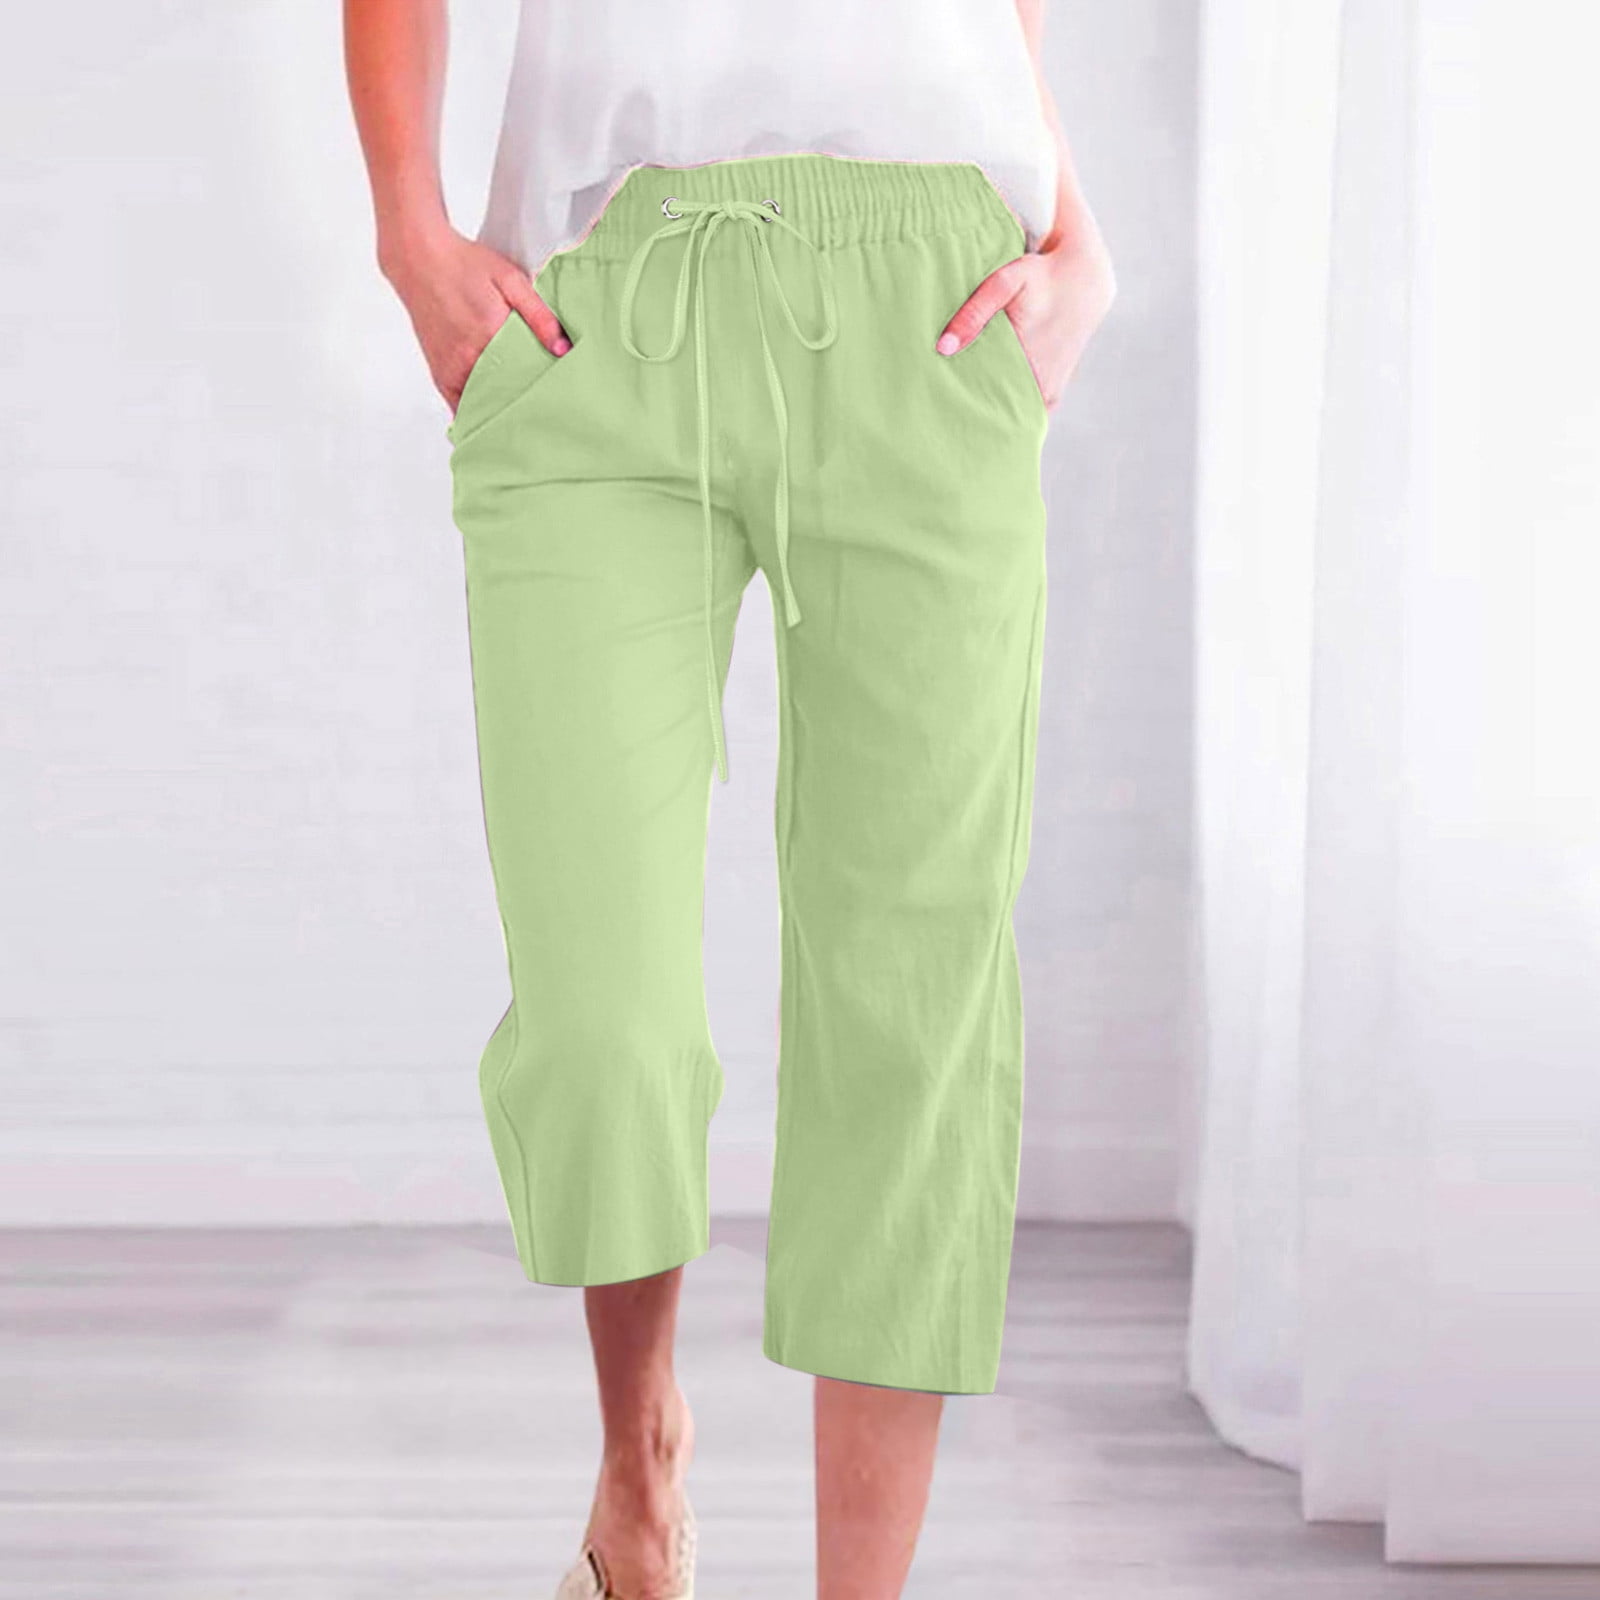 Summer Casual Wear: Plus Size Linen Capris Pants For Weddings And Business  From Weeklyed, $17.99